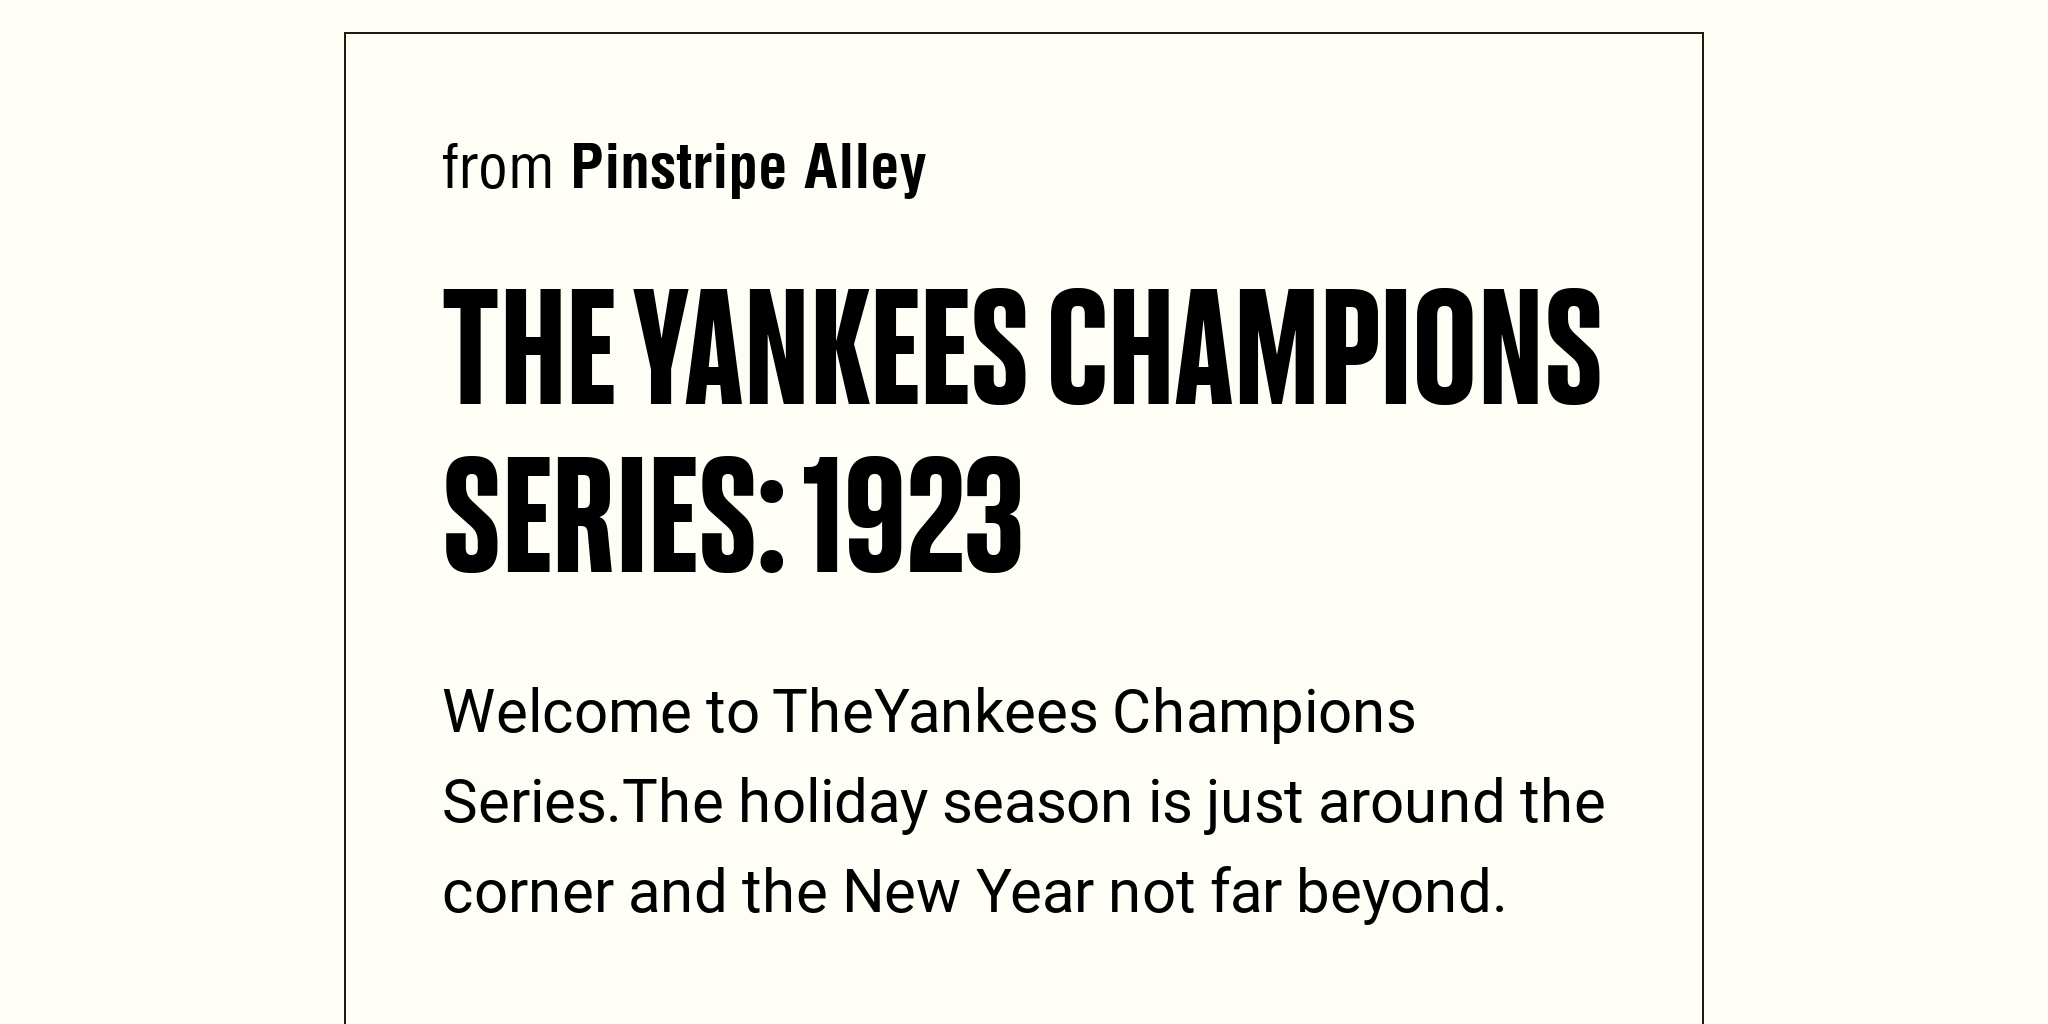 The Yankees Champions Series: 1923 - Briefly